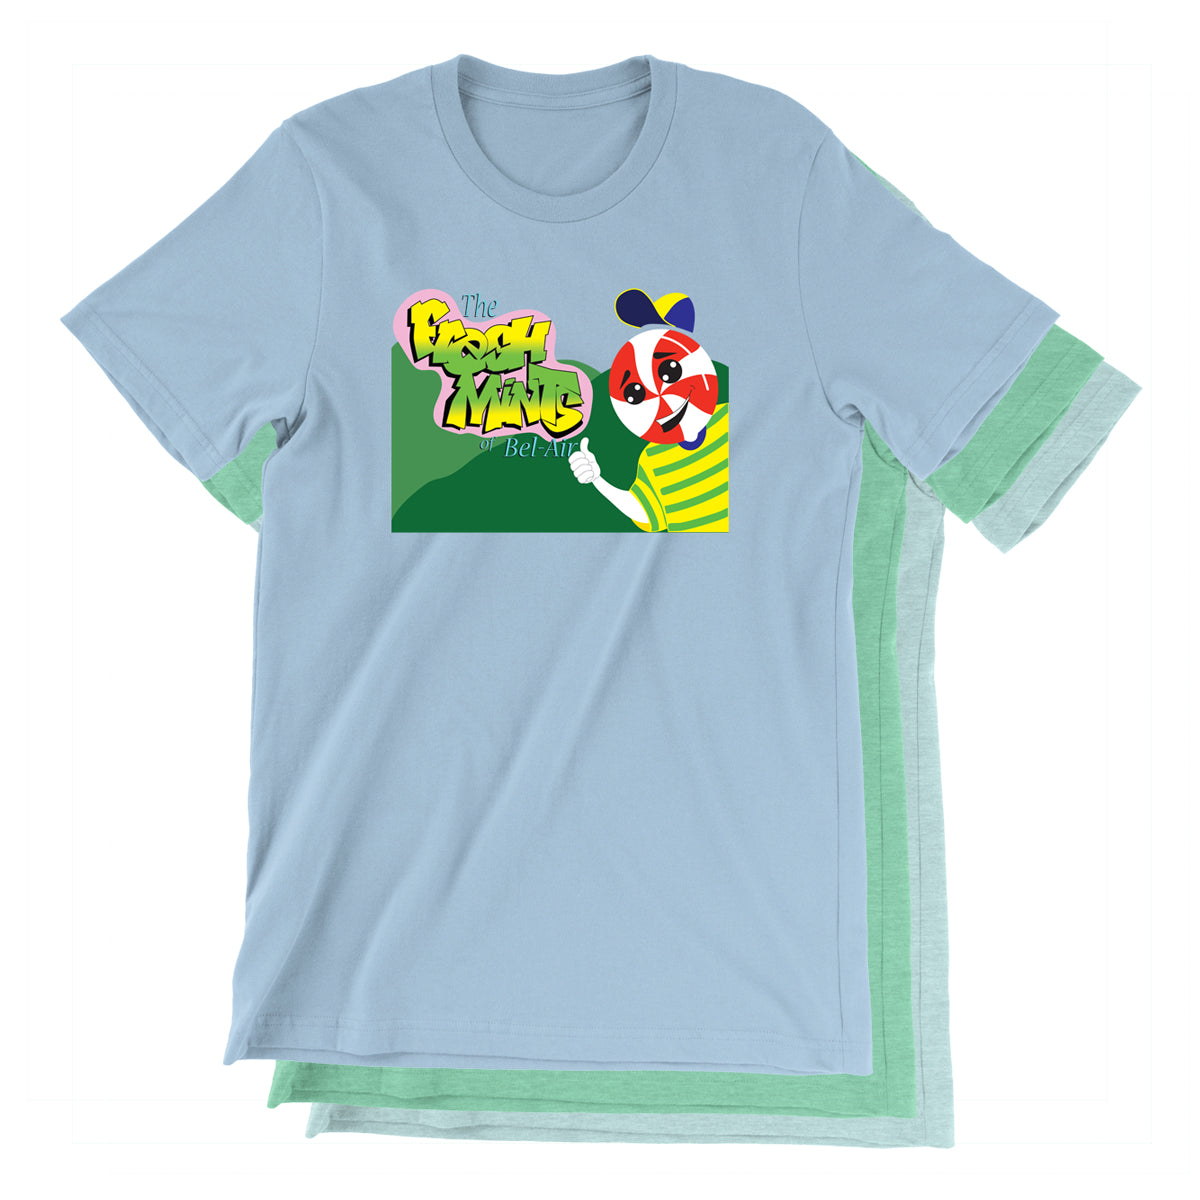 Movie The Food - The Fresh Mints Of Bel-Air T-Shirt